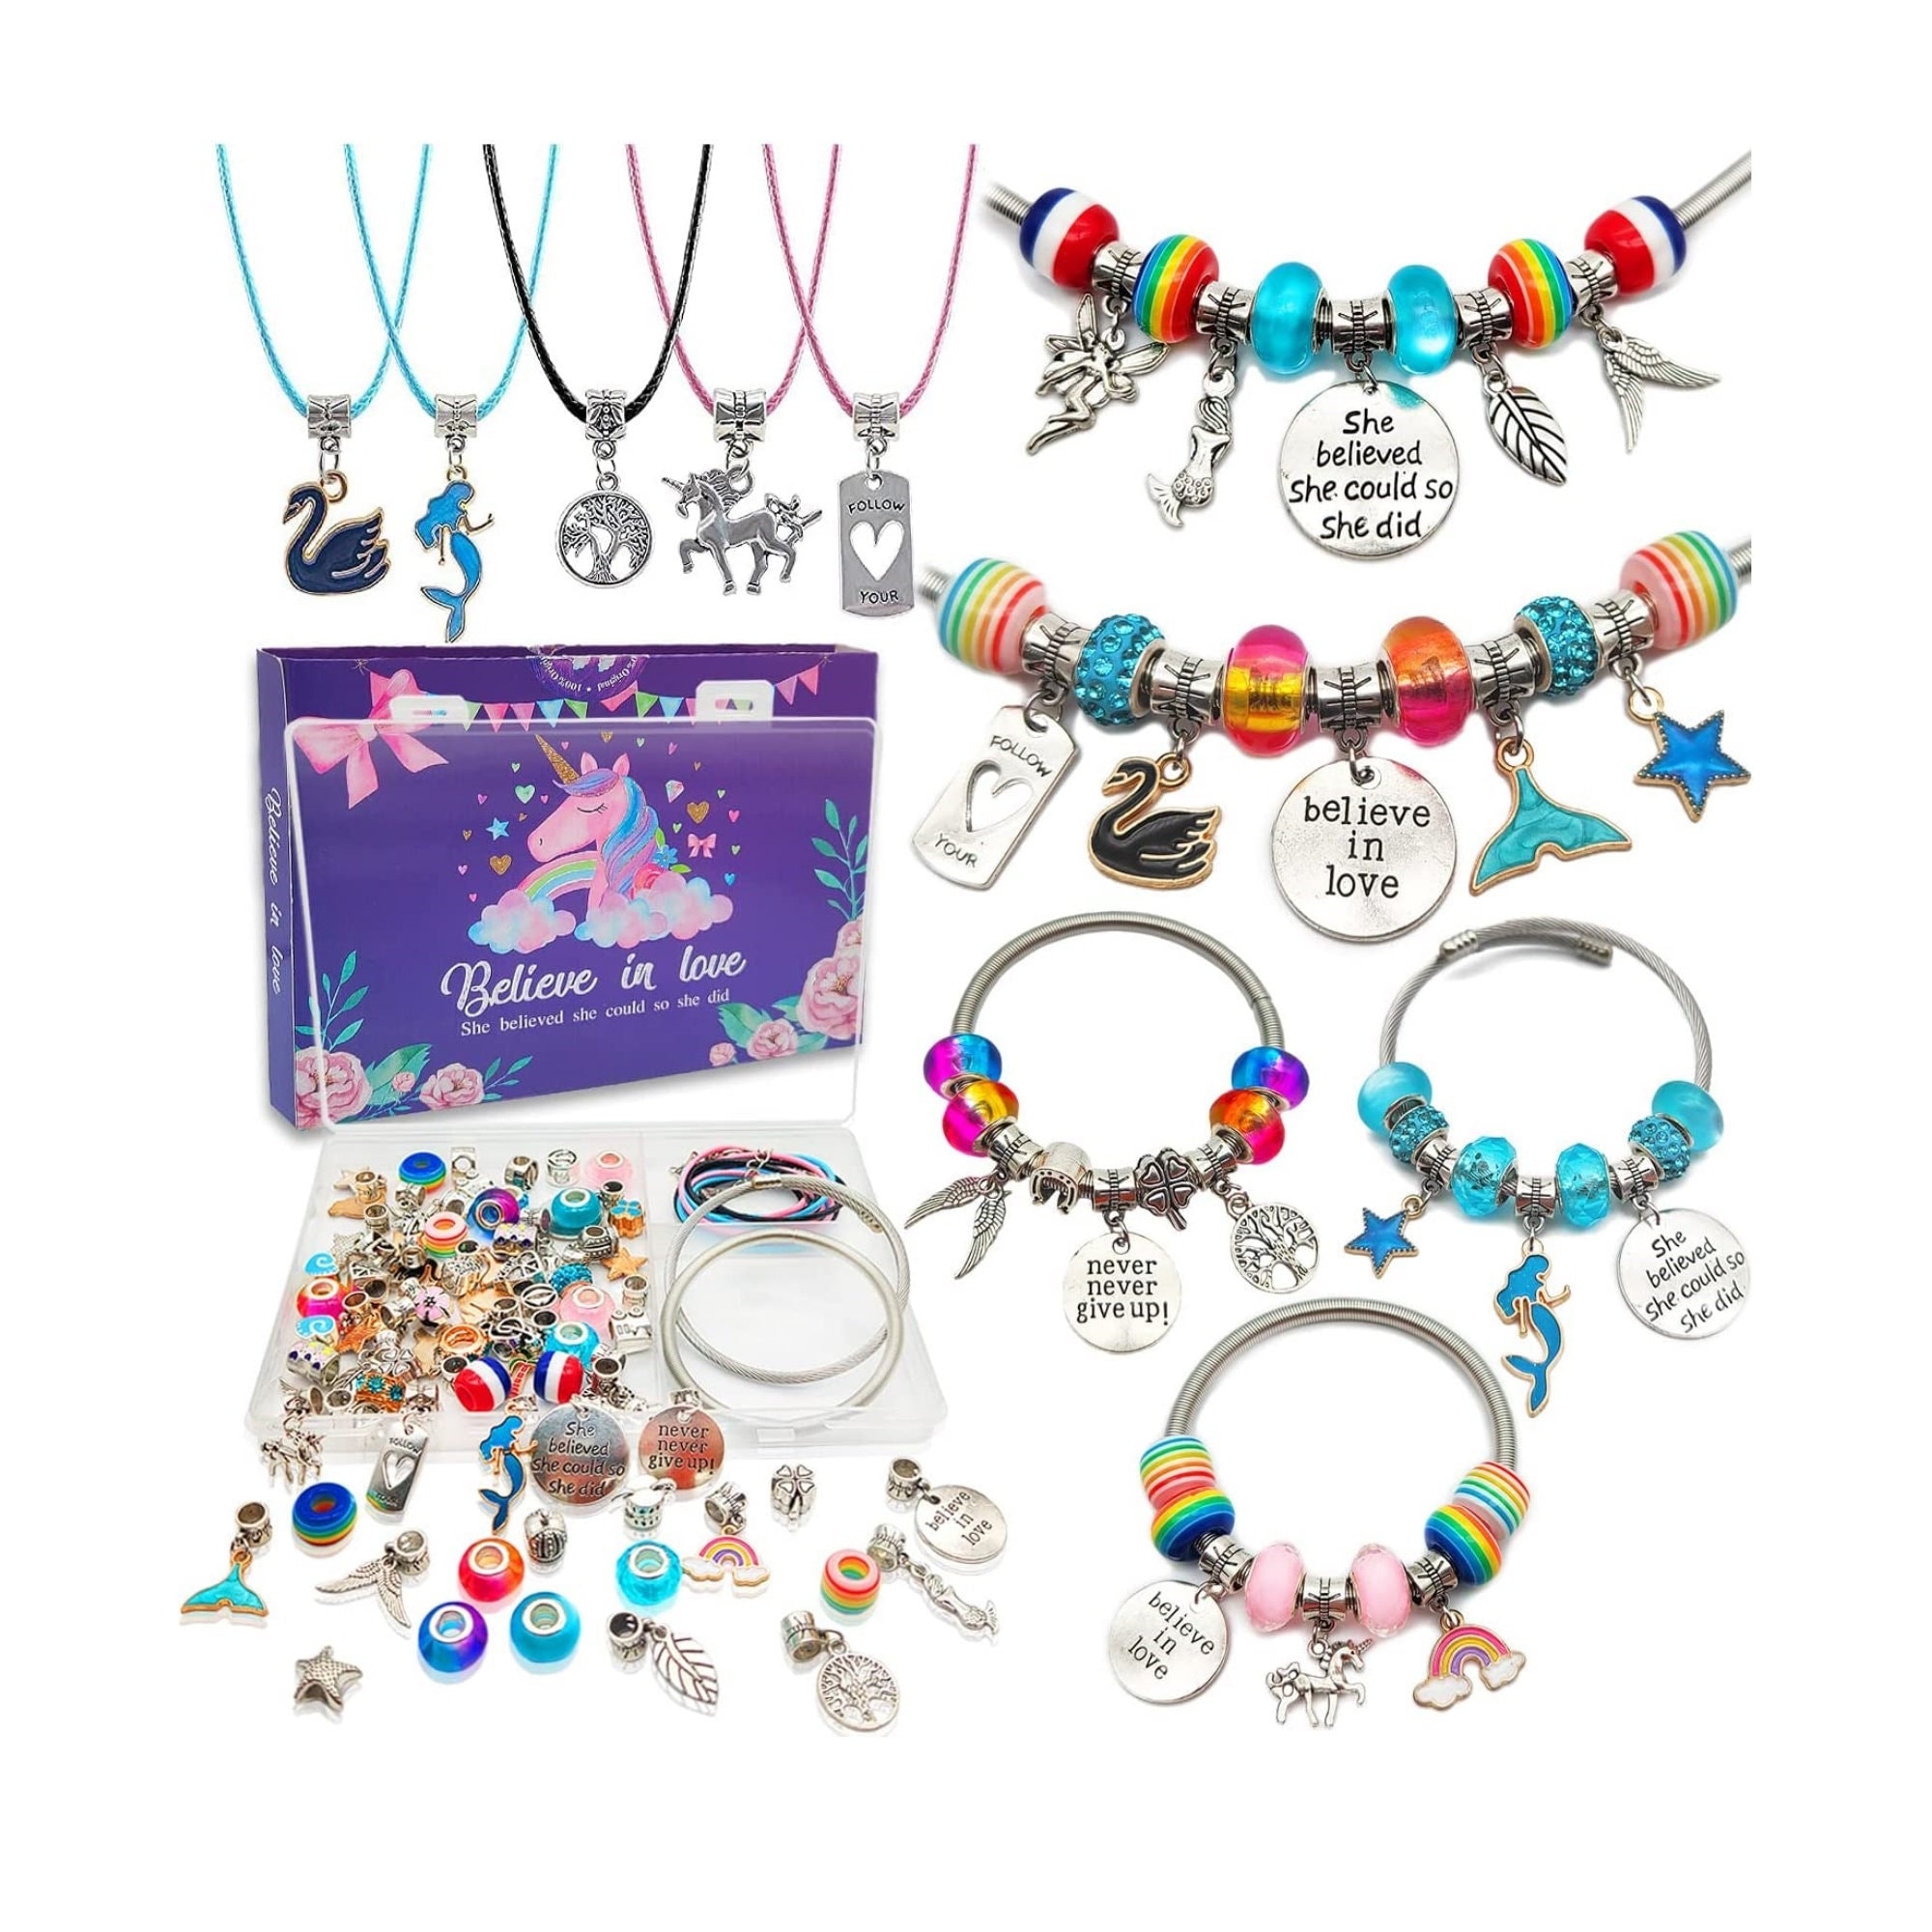  Decorative Bracelet Making Kit Beads, Christmas Gift for Girls,  Toys for Girls,Girls Toys,Mermaid Artwork Gift Set, Ideal for Girls and  Teenagers Aged3 4 5 6 7 8 9 10 1112, Jewelry Making Supplies